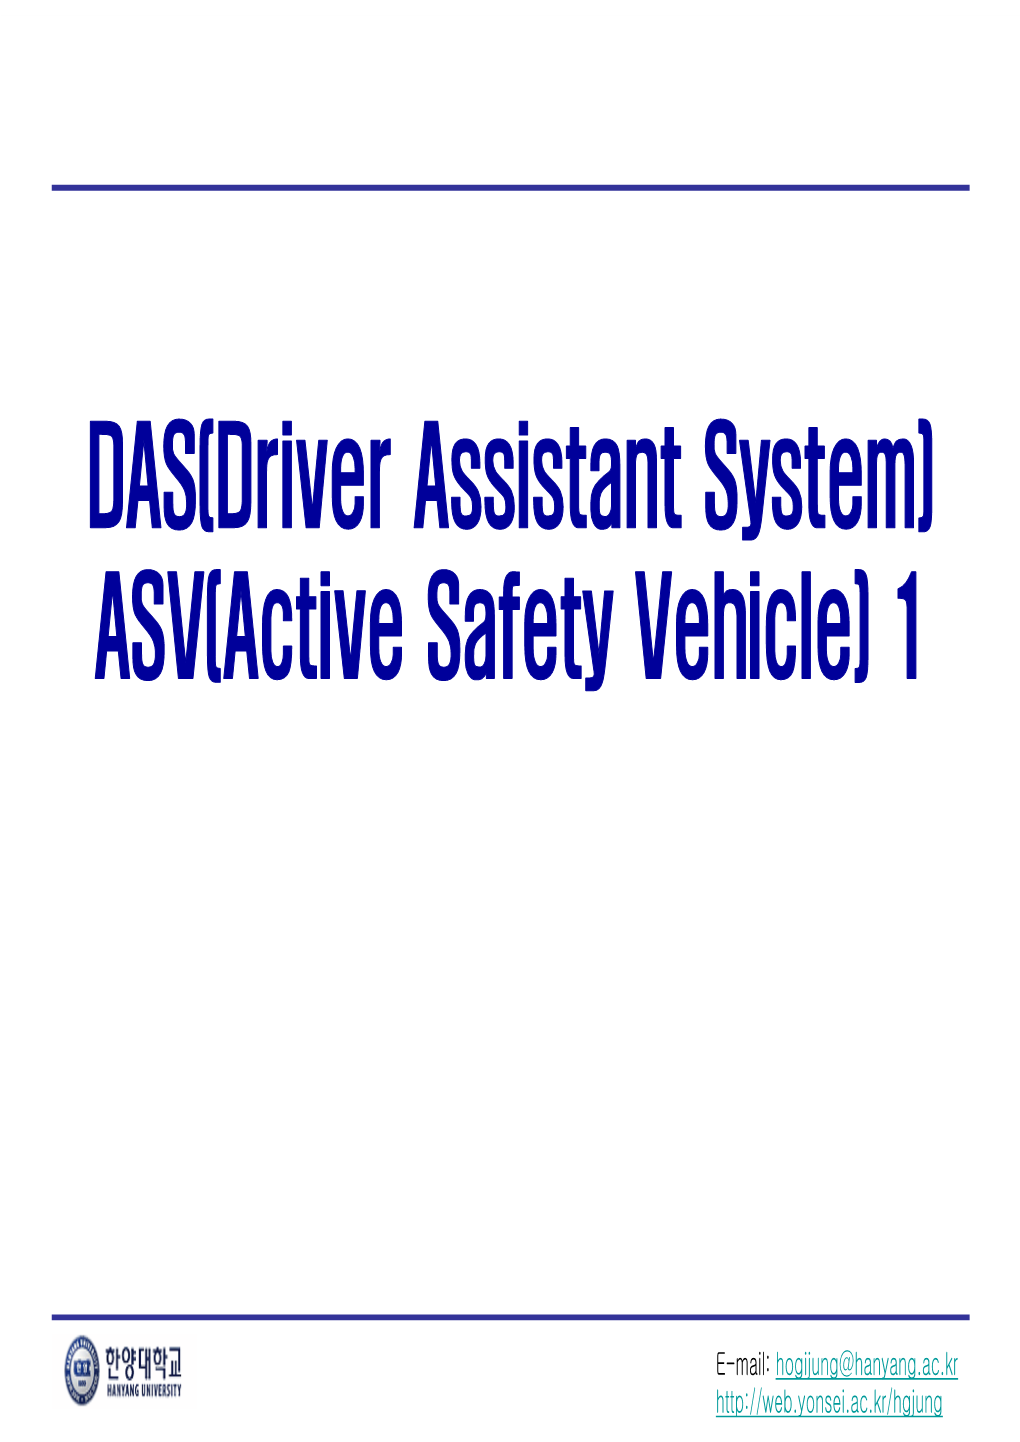 DAS(Driver Assistant System) ASV(Active Safety Vehicle) 1